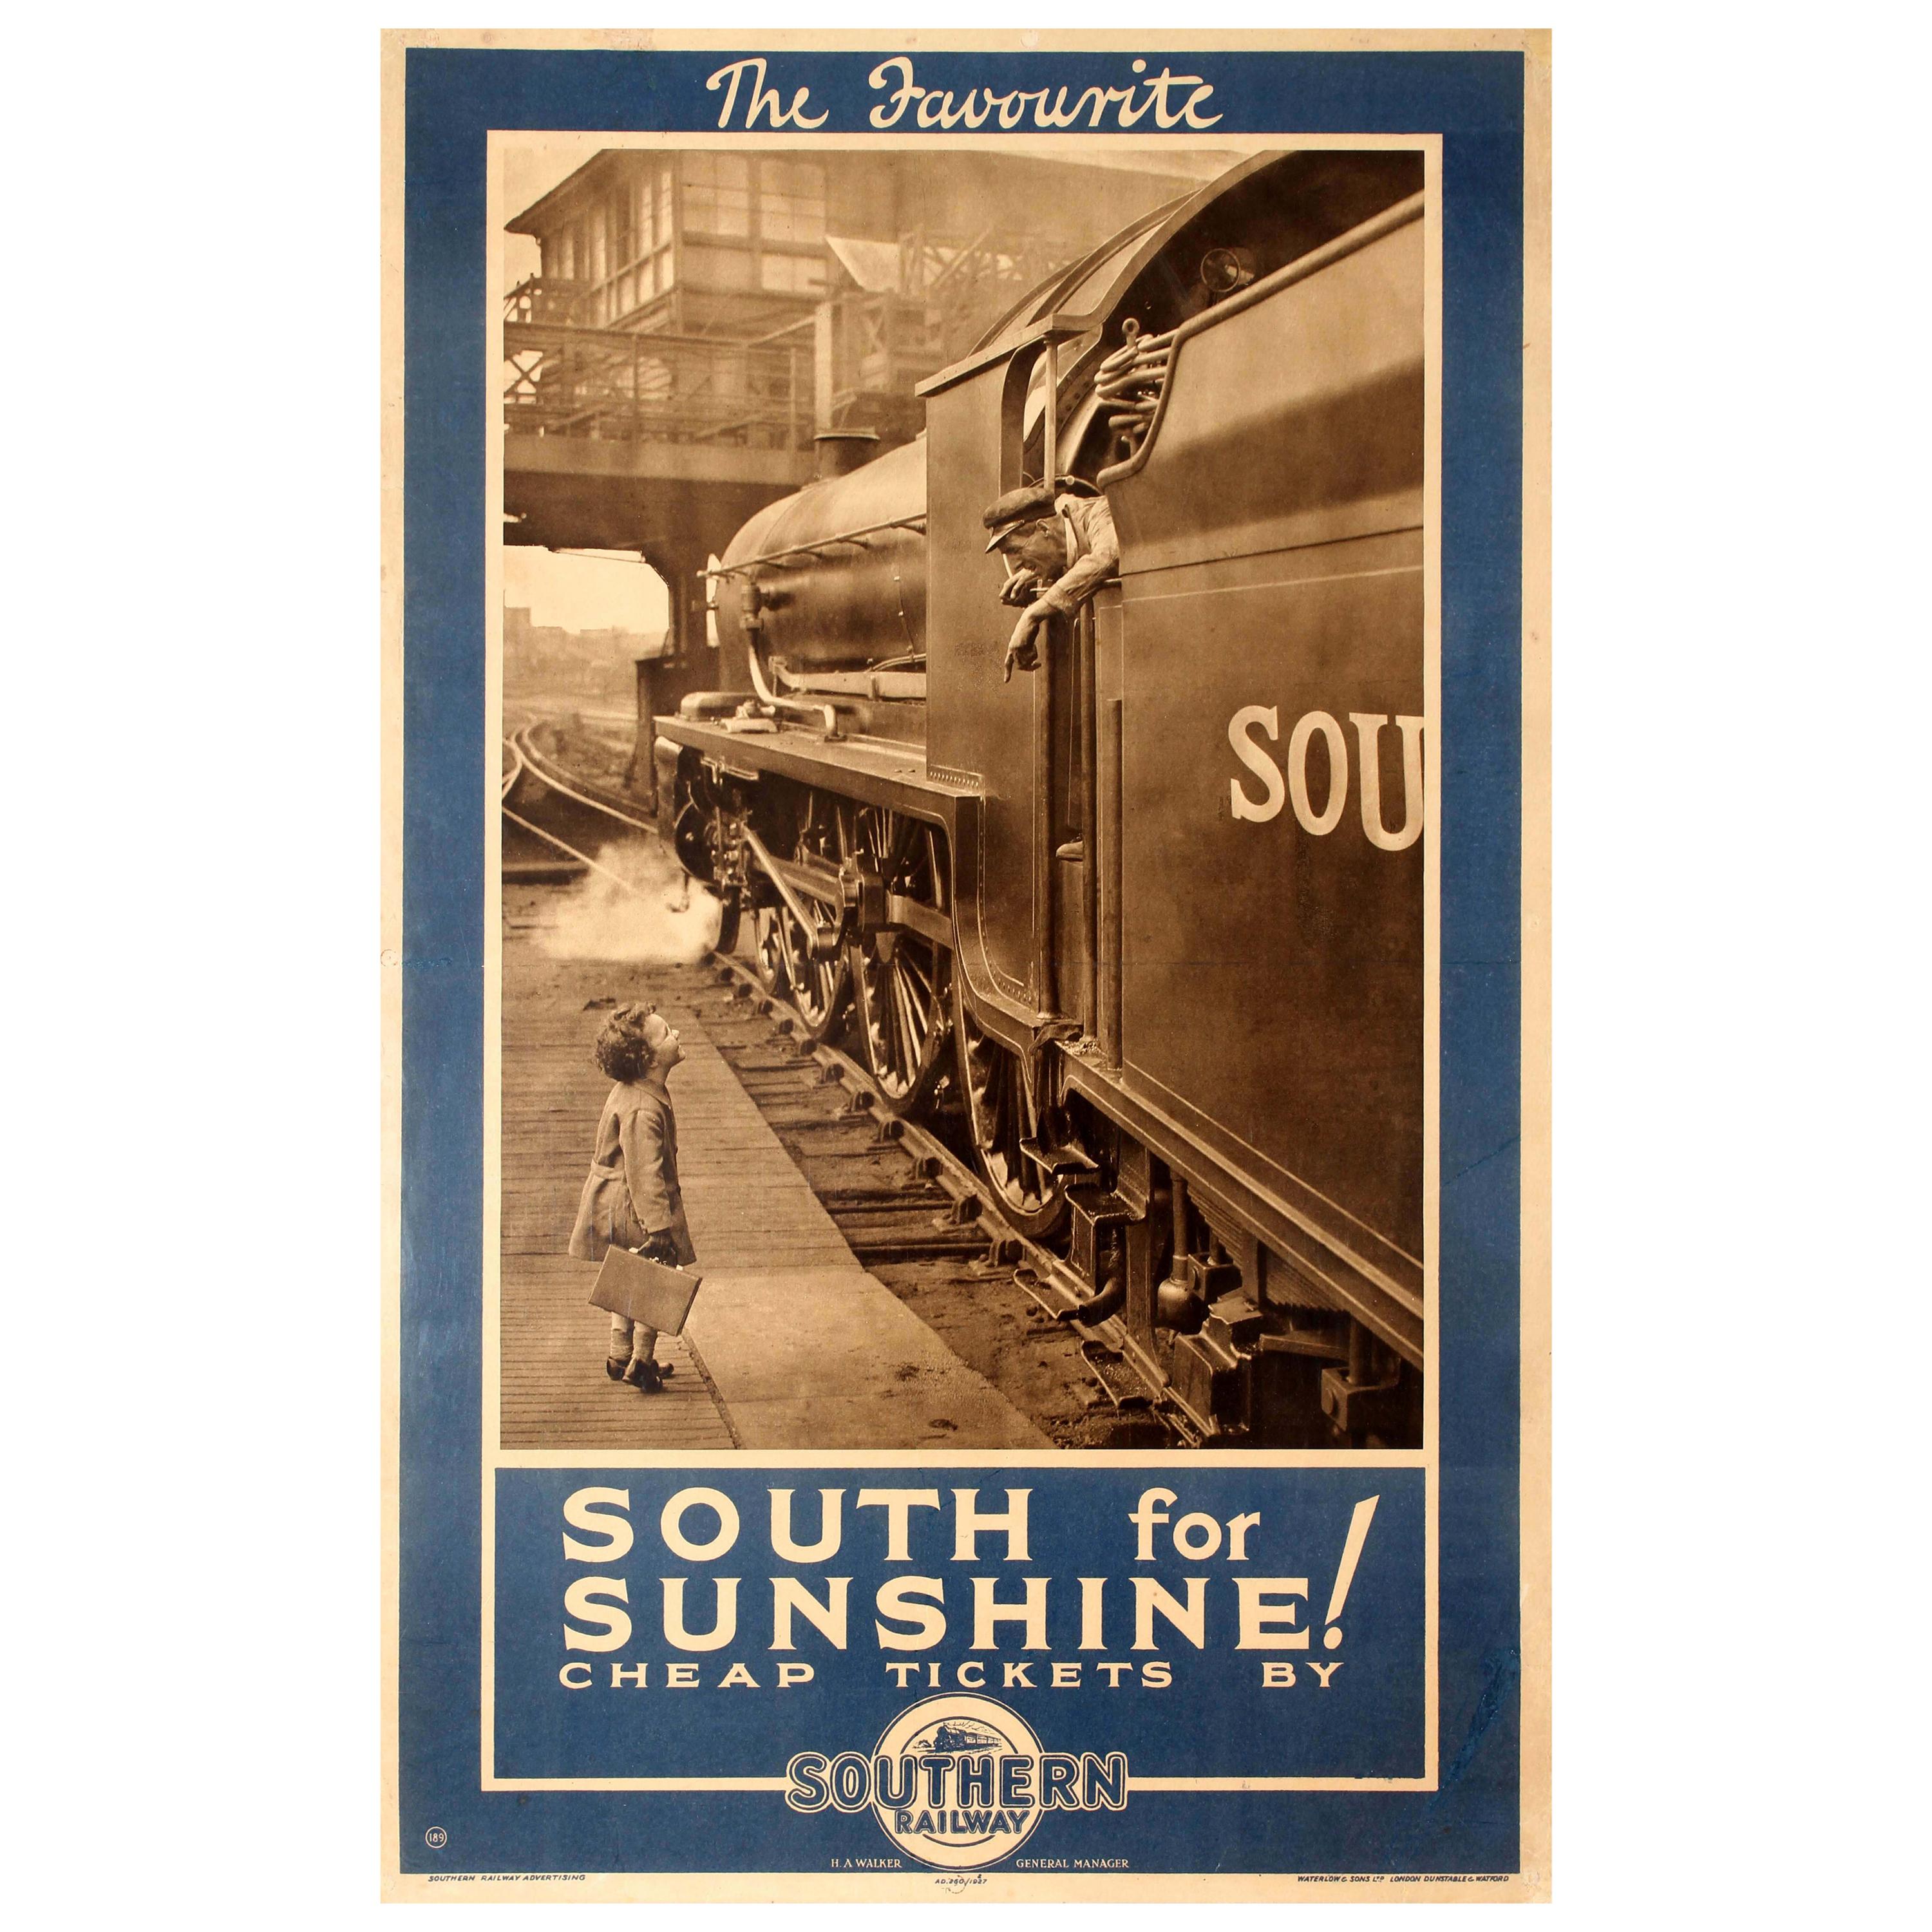 Original Vintage Southern Railway Poster Cheap Tickets to the South for Sunshine